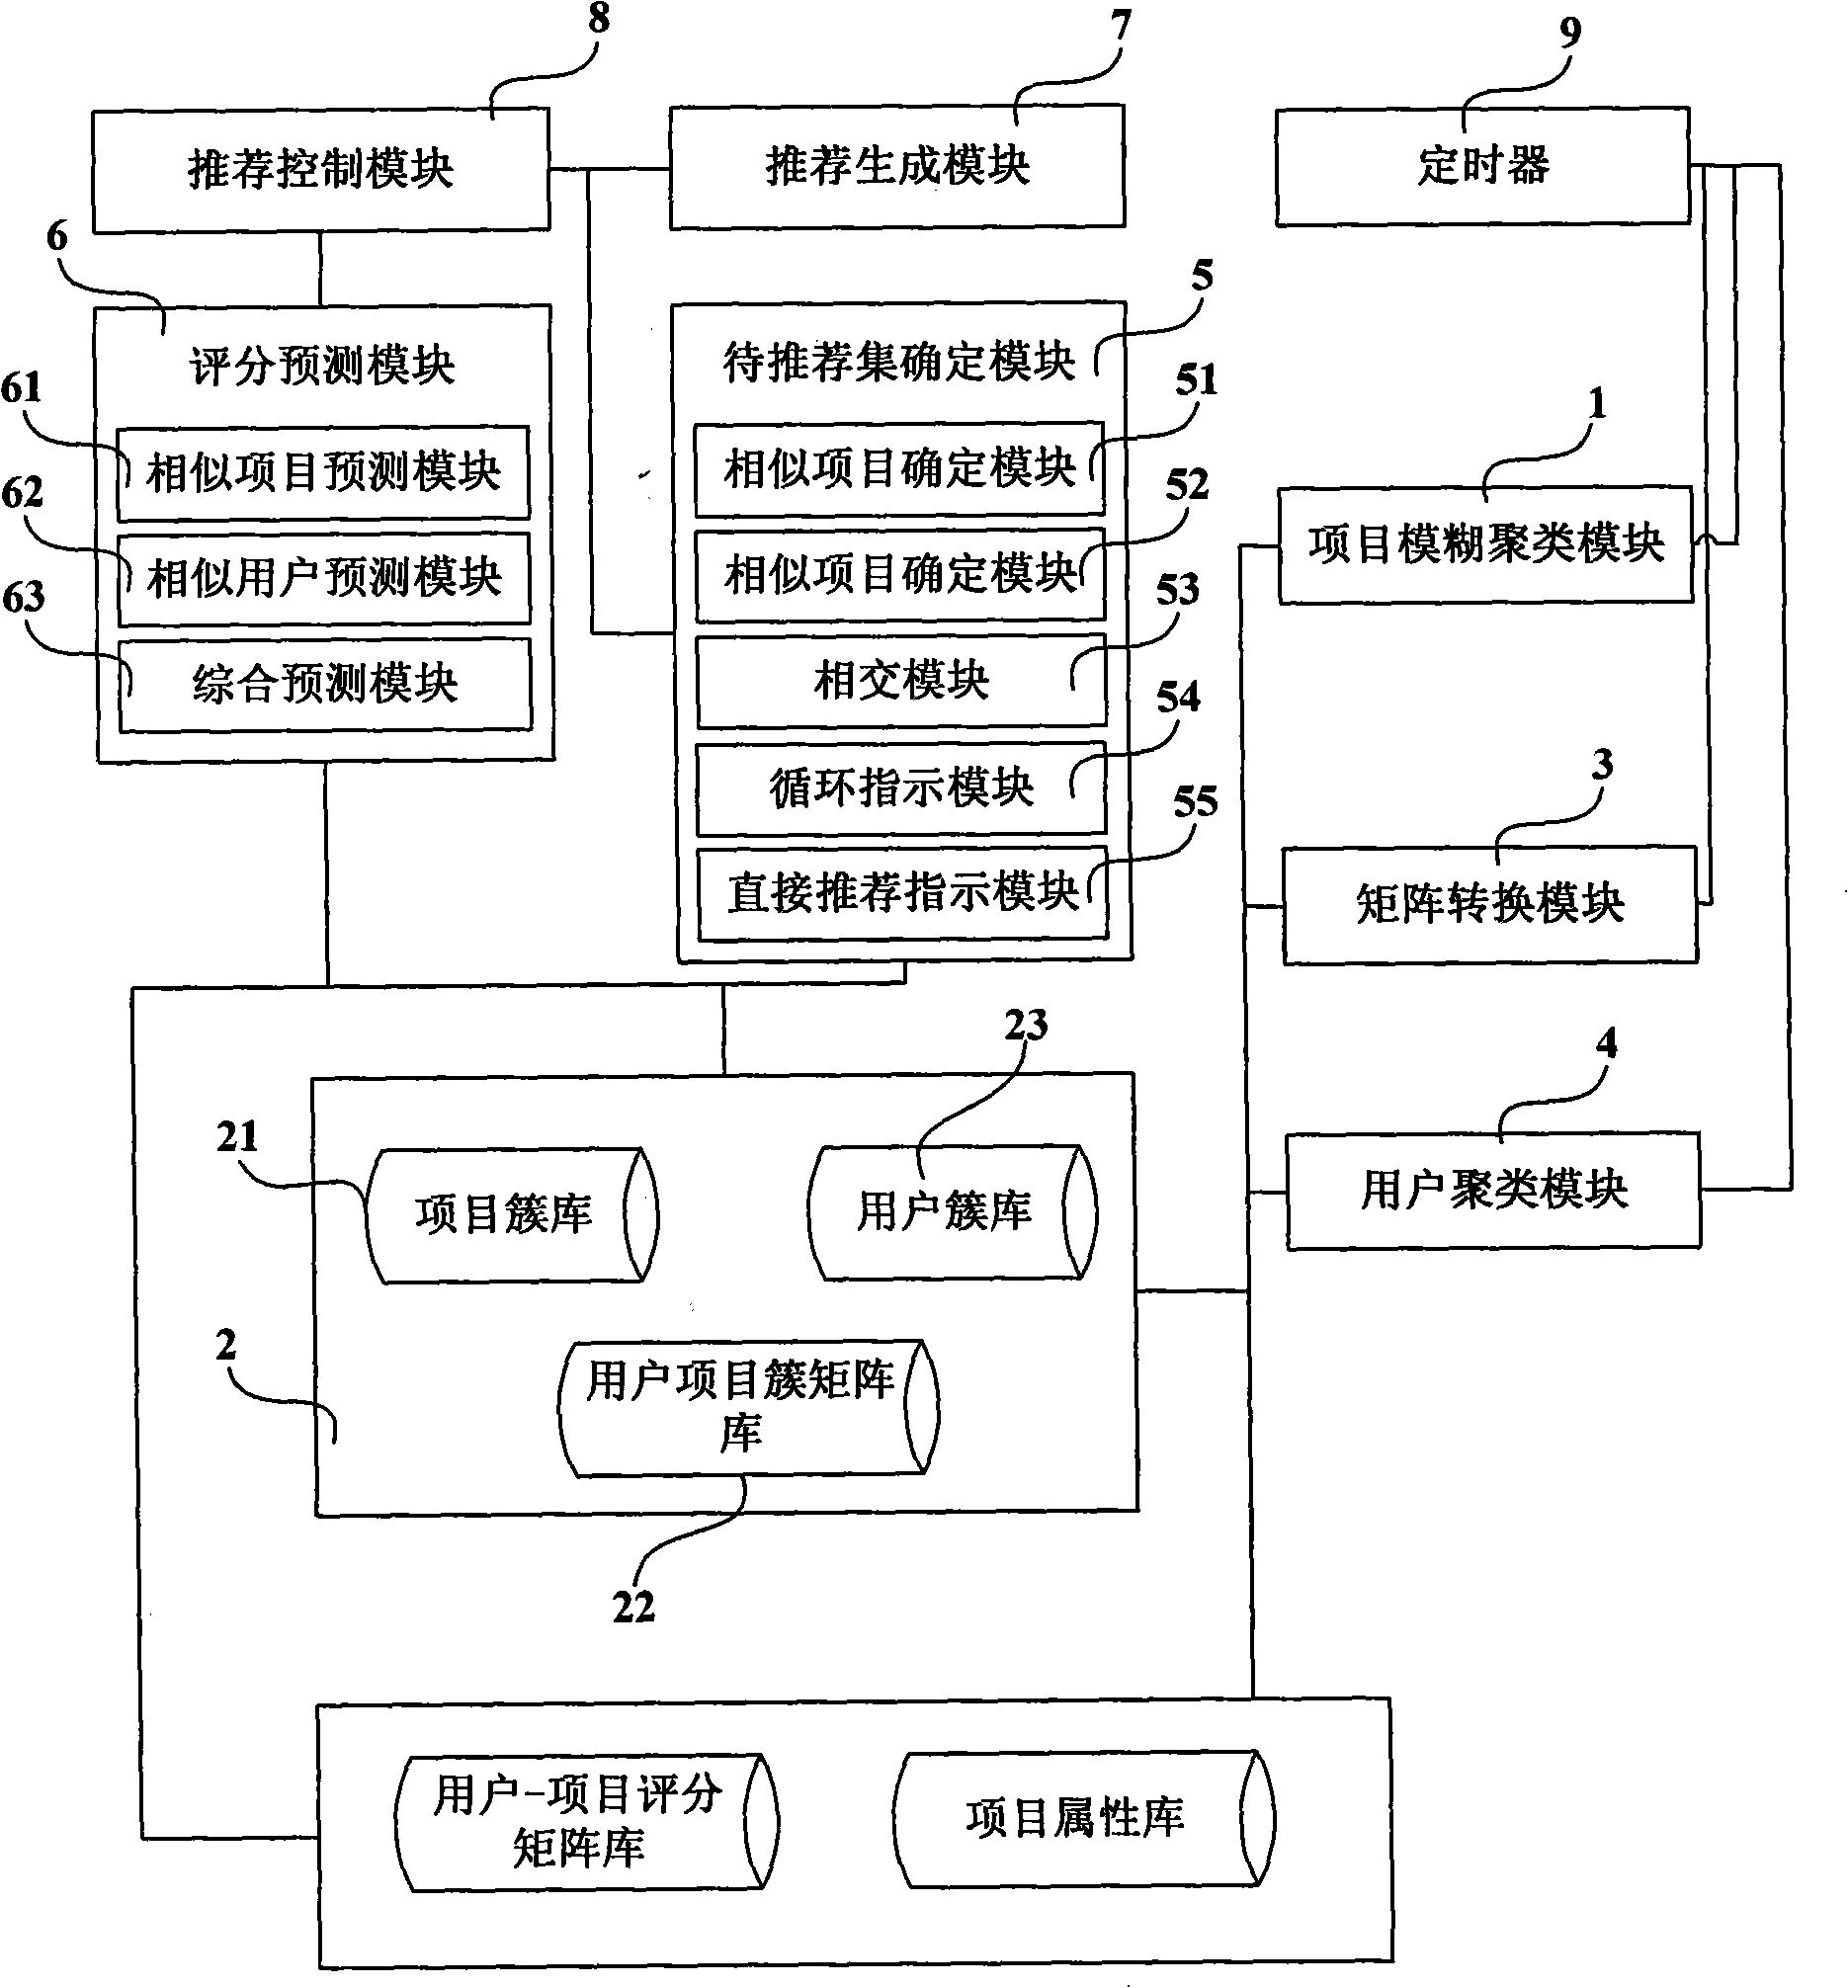 Recommendation system and method